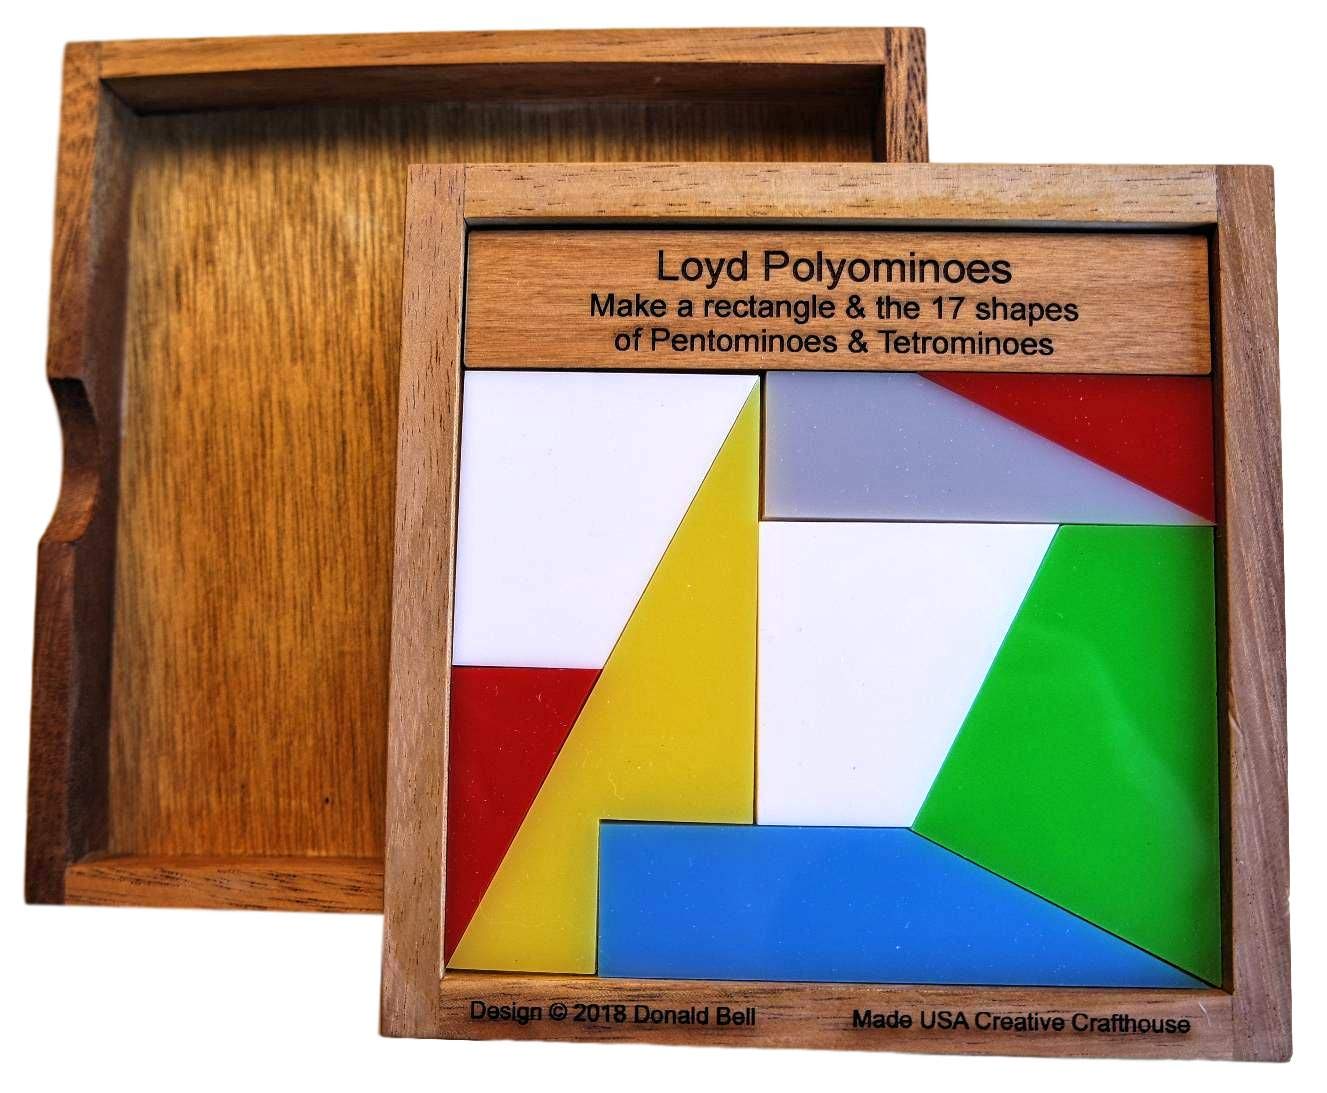 Loyd Polyominoes – 2018 Puzzle Design Design. Eight Pieces Make the Rectangle Plus 17 Shapes